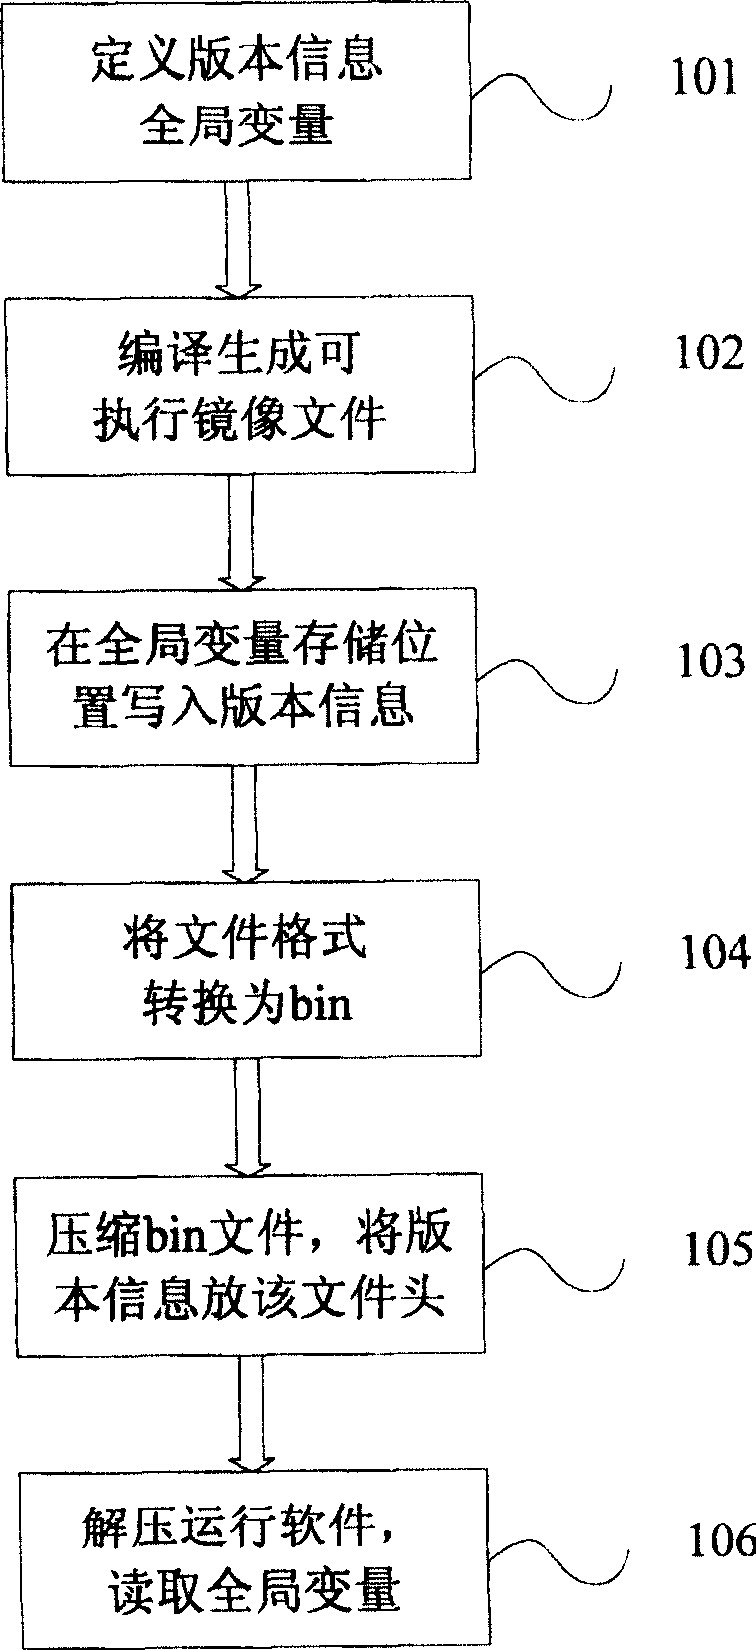 Method for recording version information in embedded software